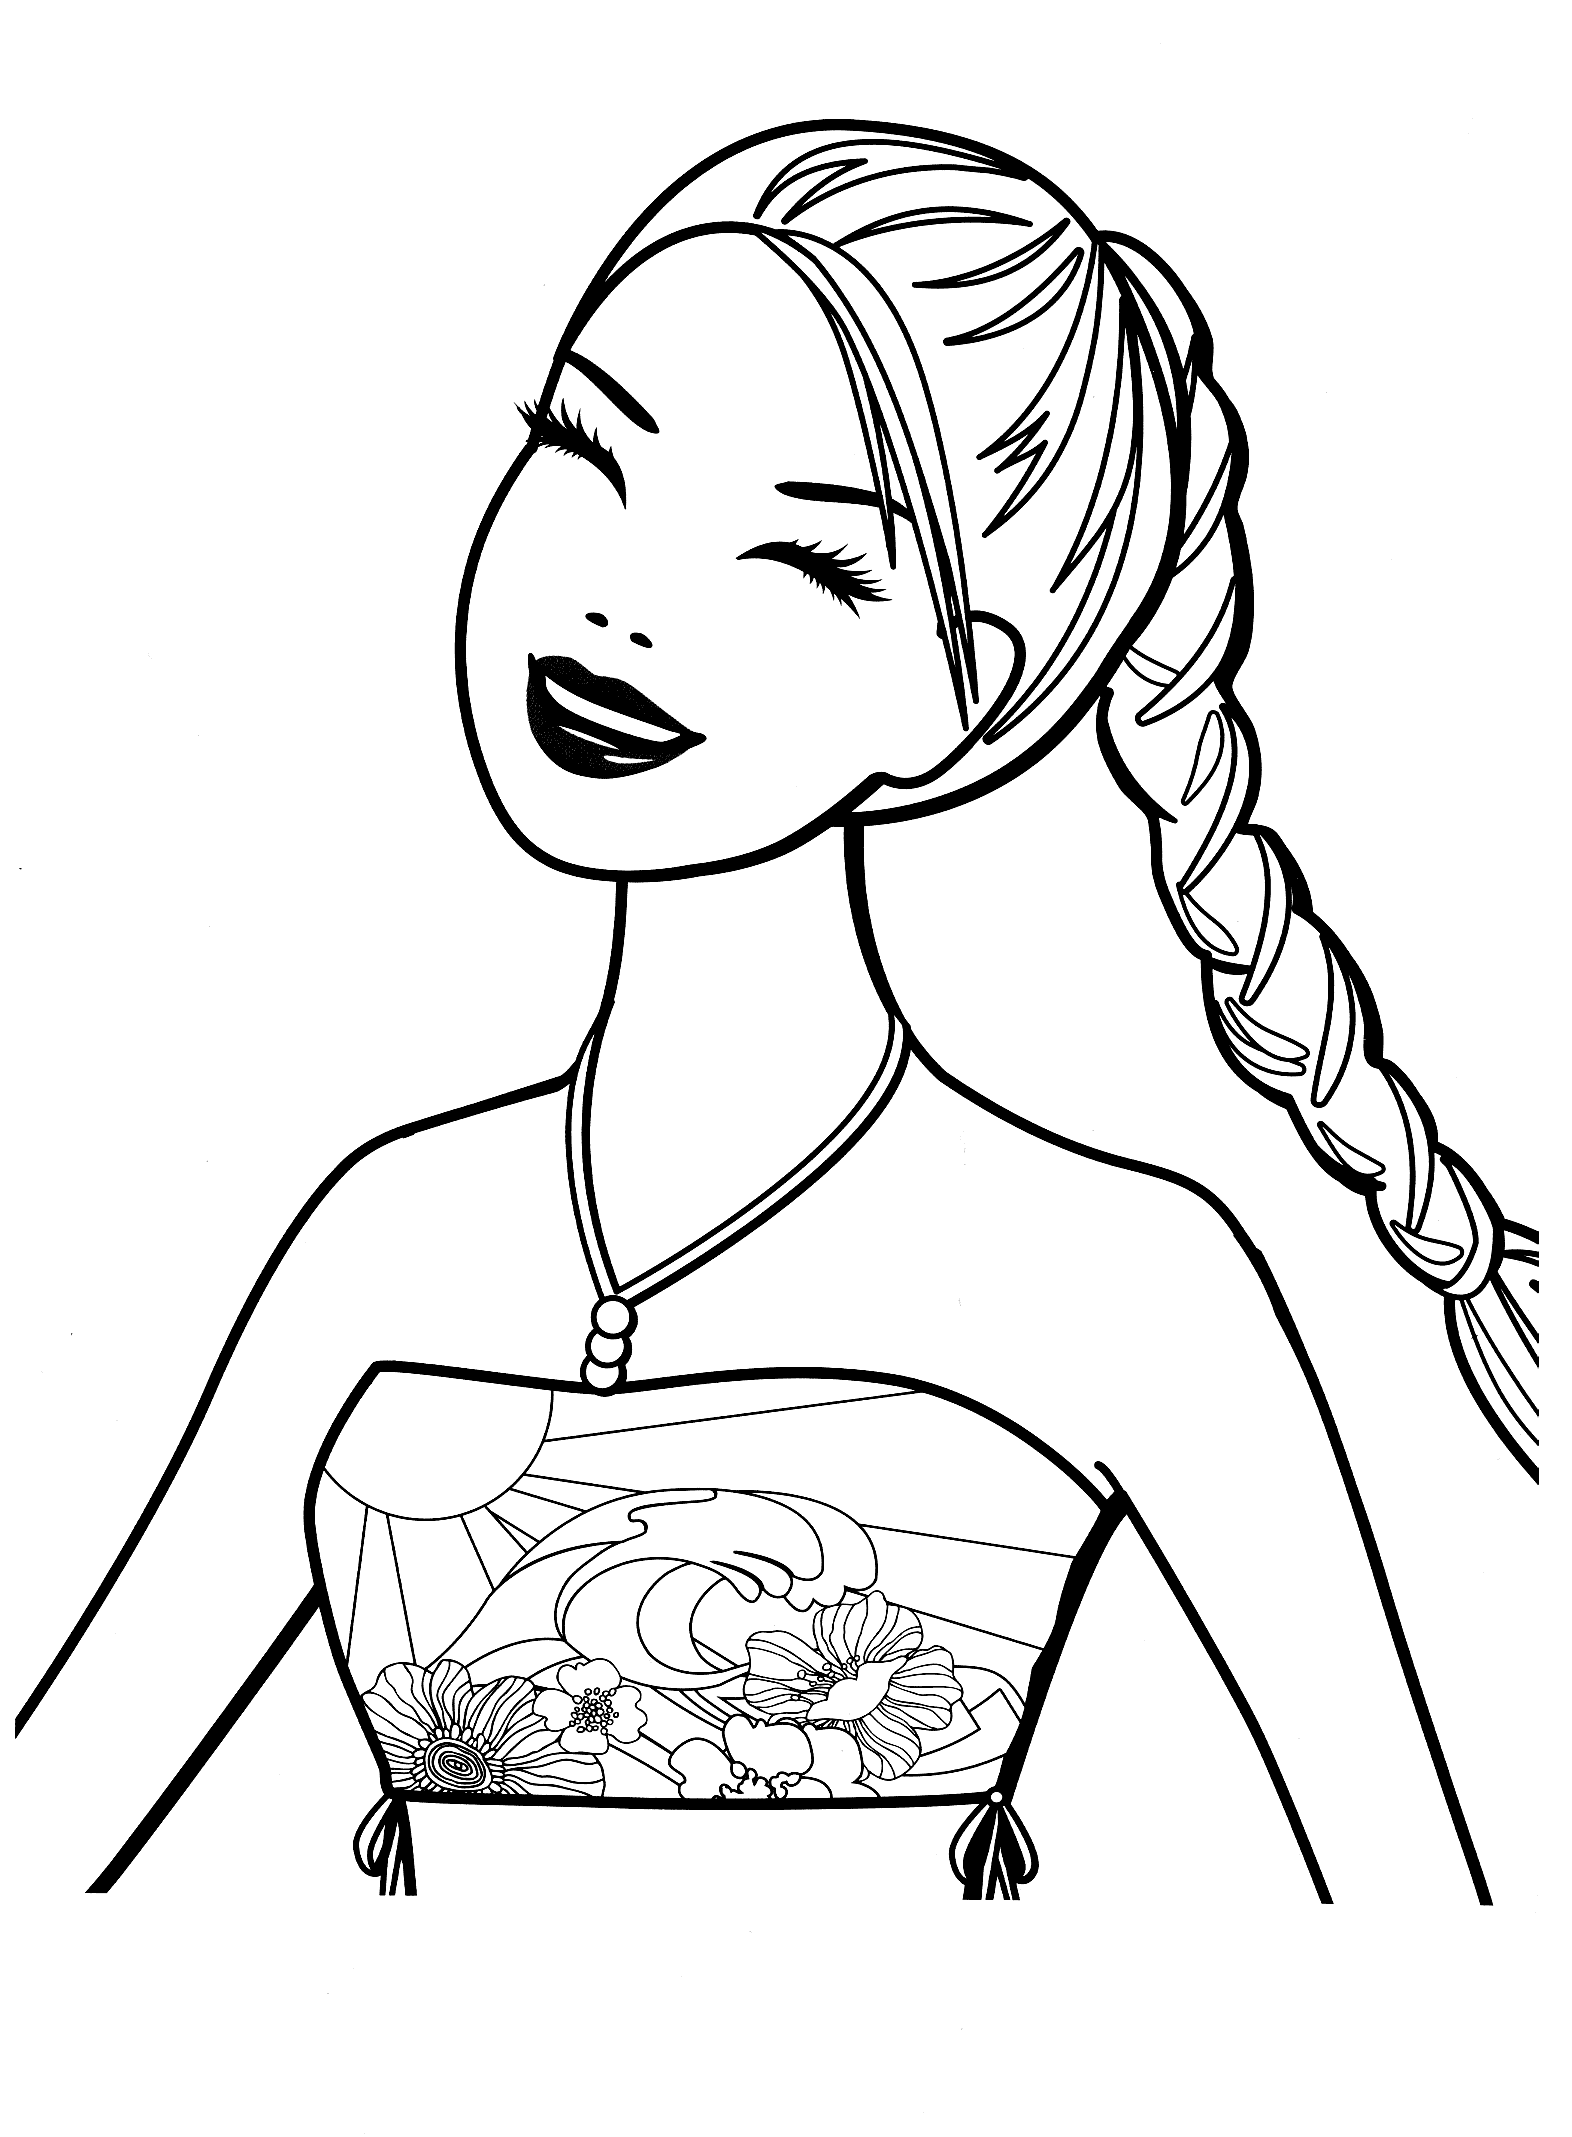 Coloring page - Barbie with beautiful braid